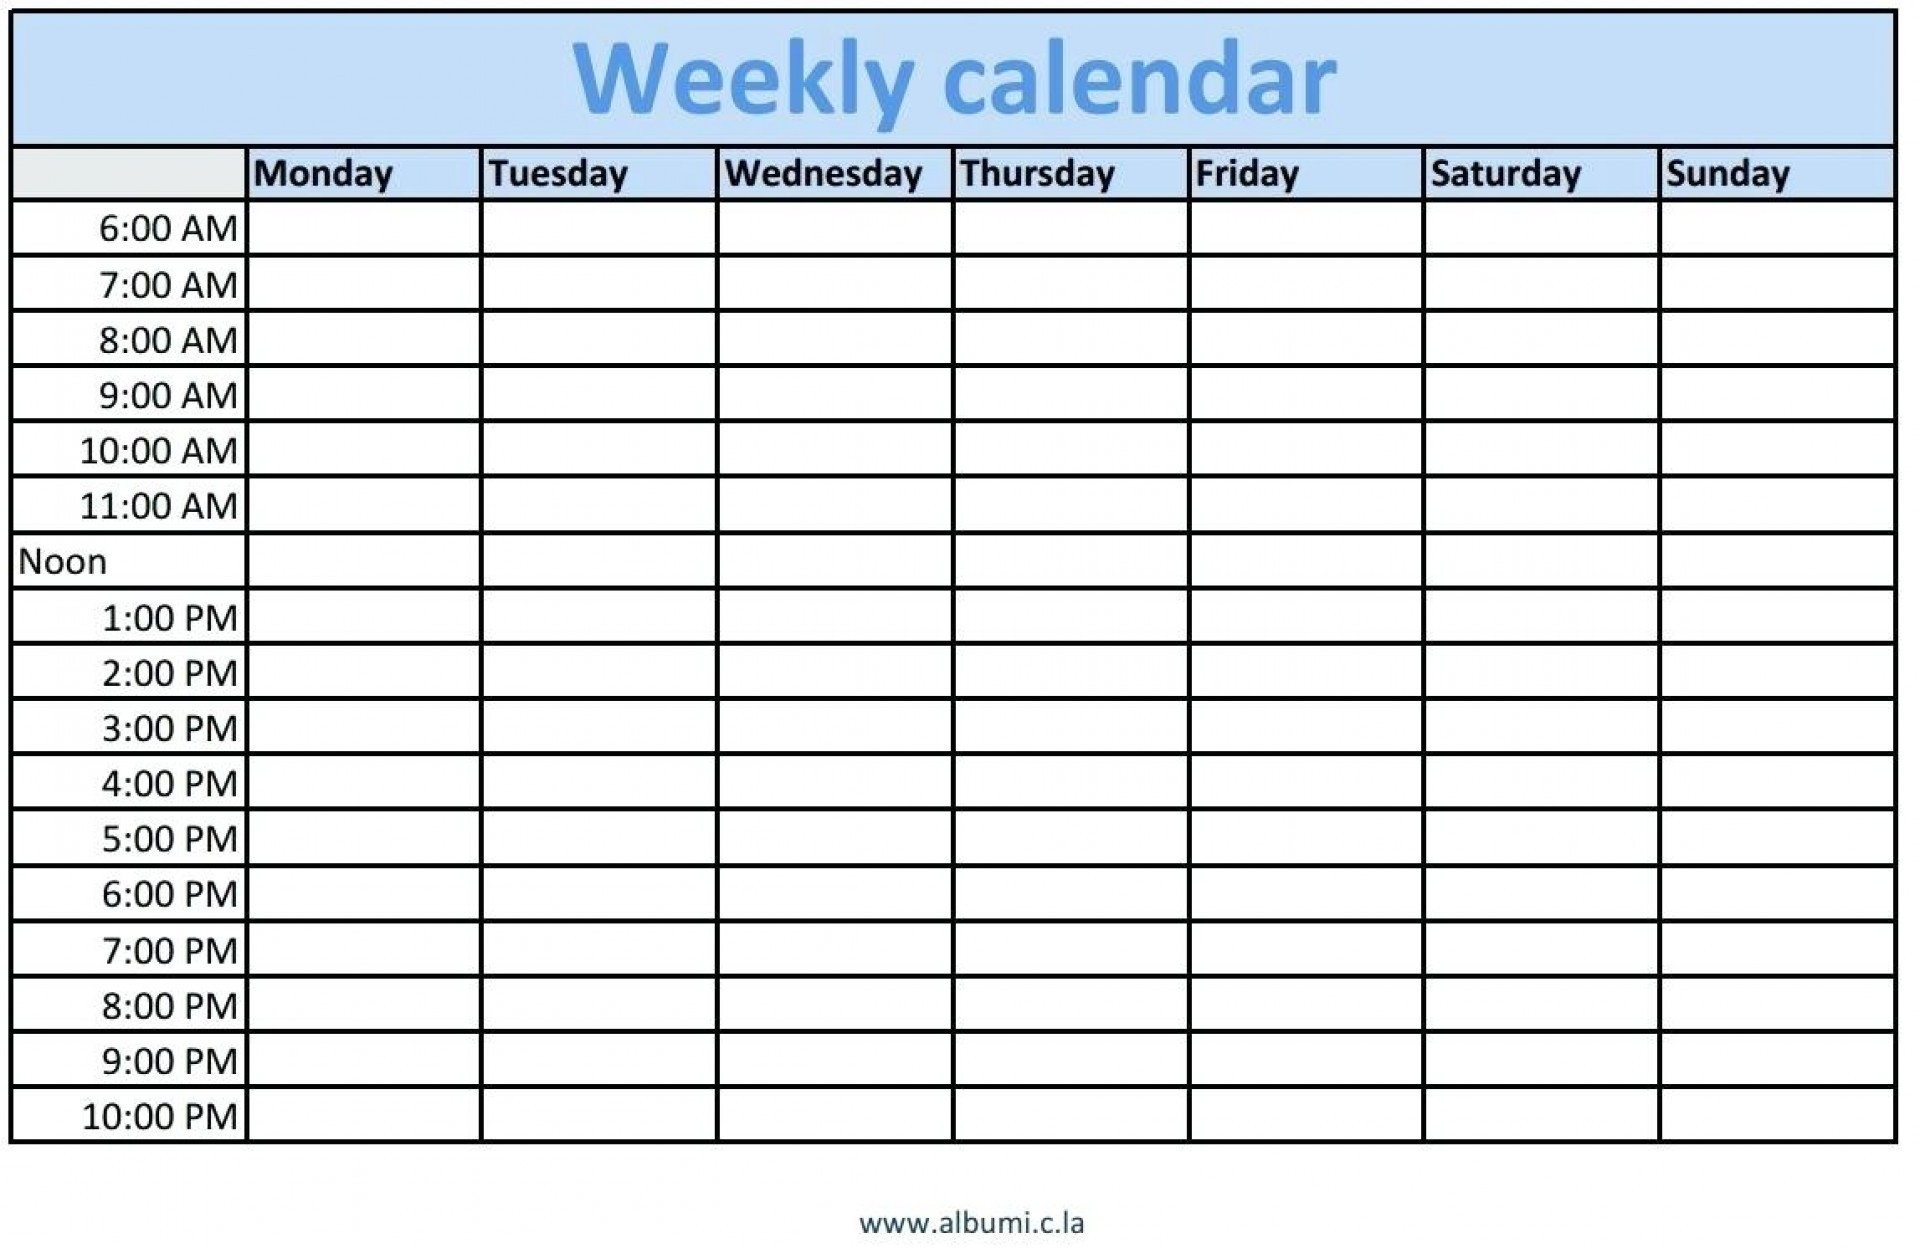 Blank Schedule Template With Time Slots | Example Calendar for Weekly Schedule With Time Slots